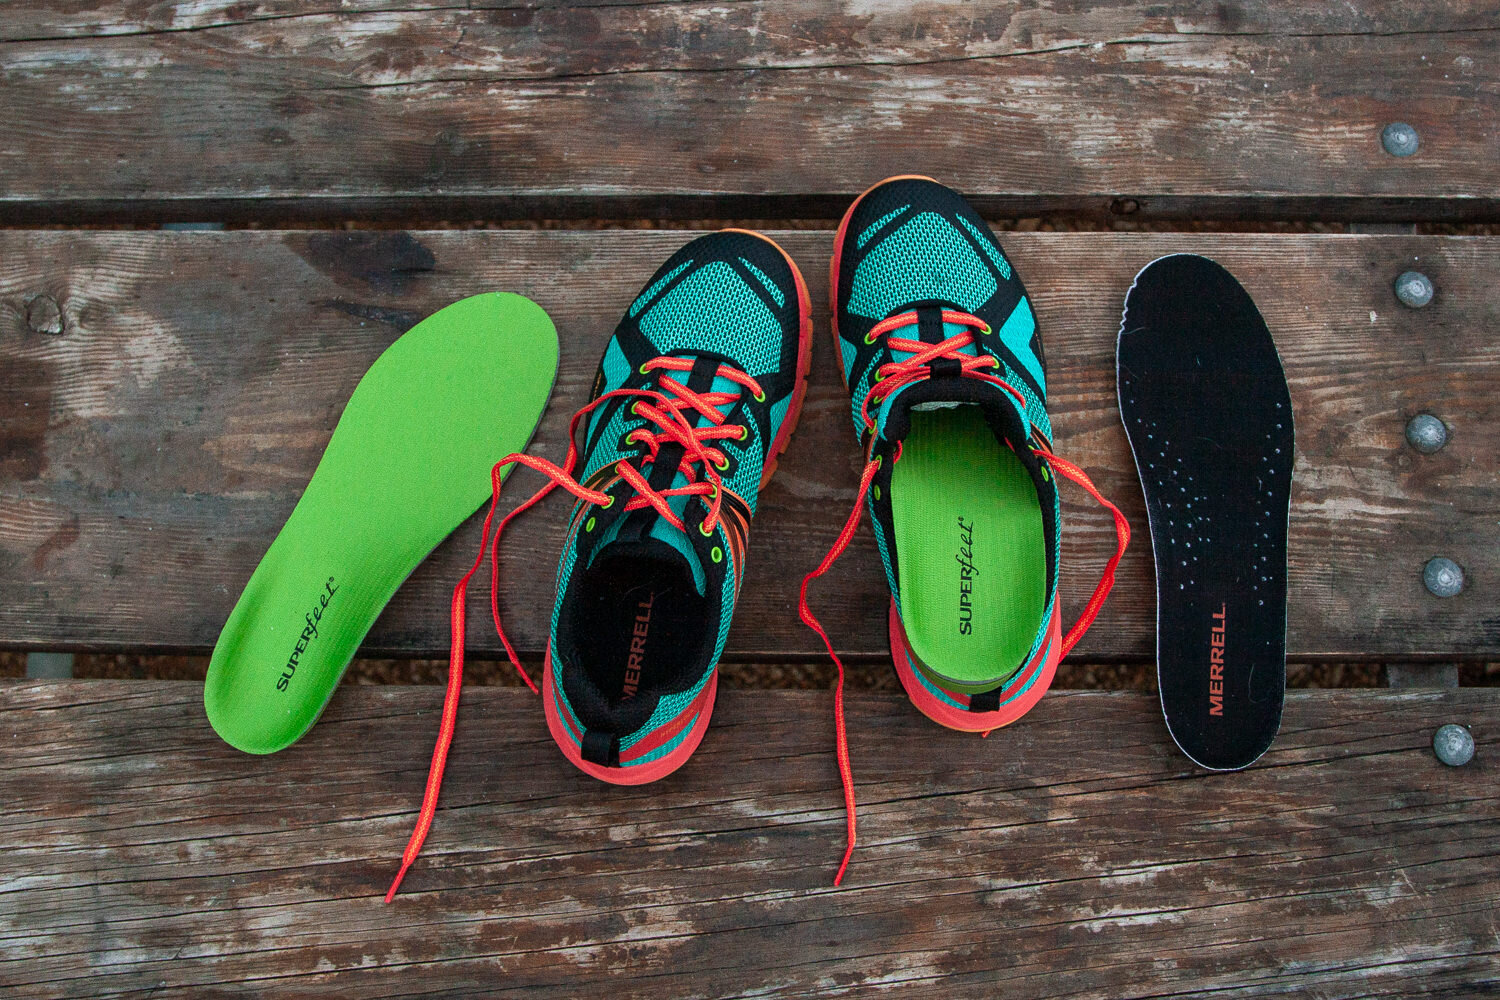 Superfeet Insoles can help you customize the fit on your favorite hiking shoes, and they’re on sale for 25% Off